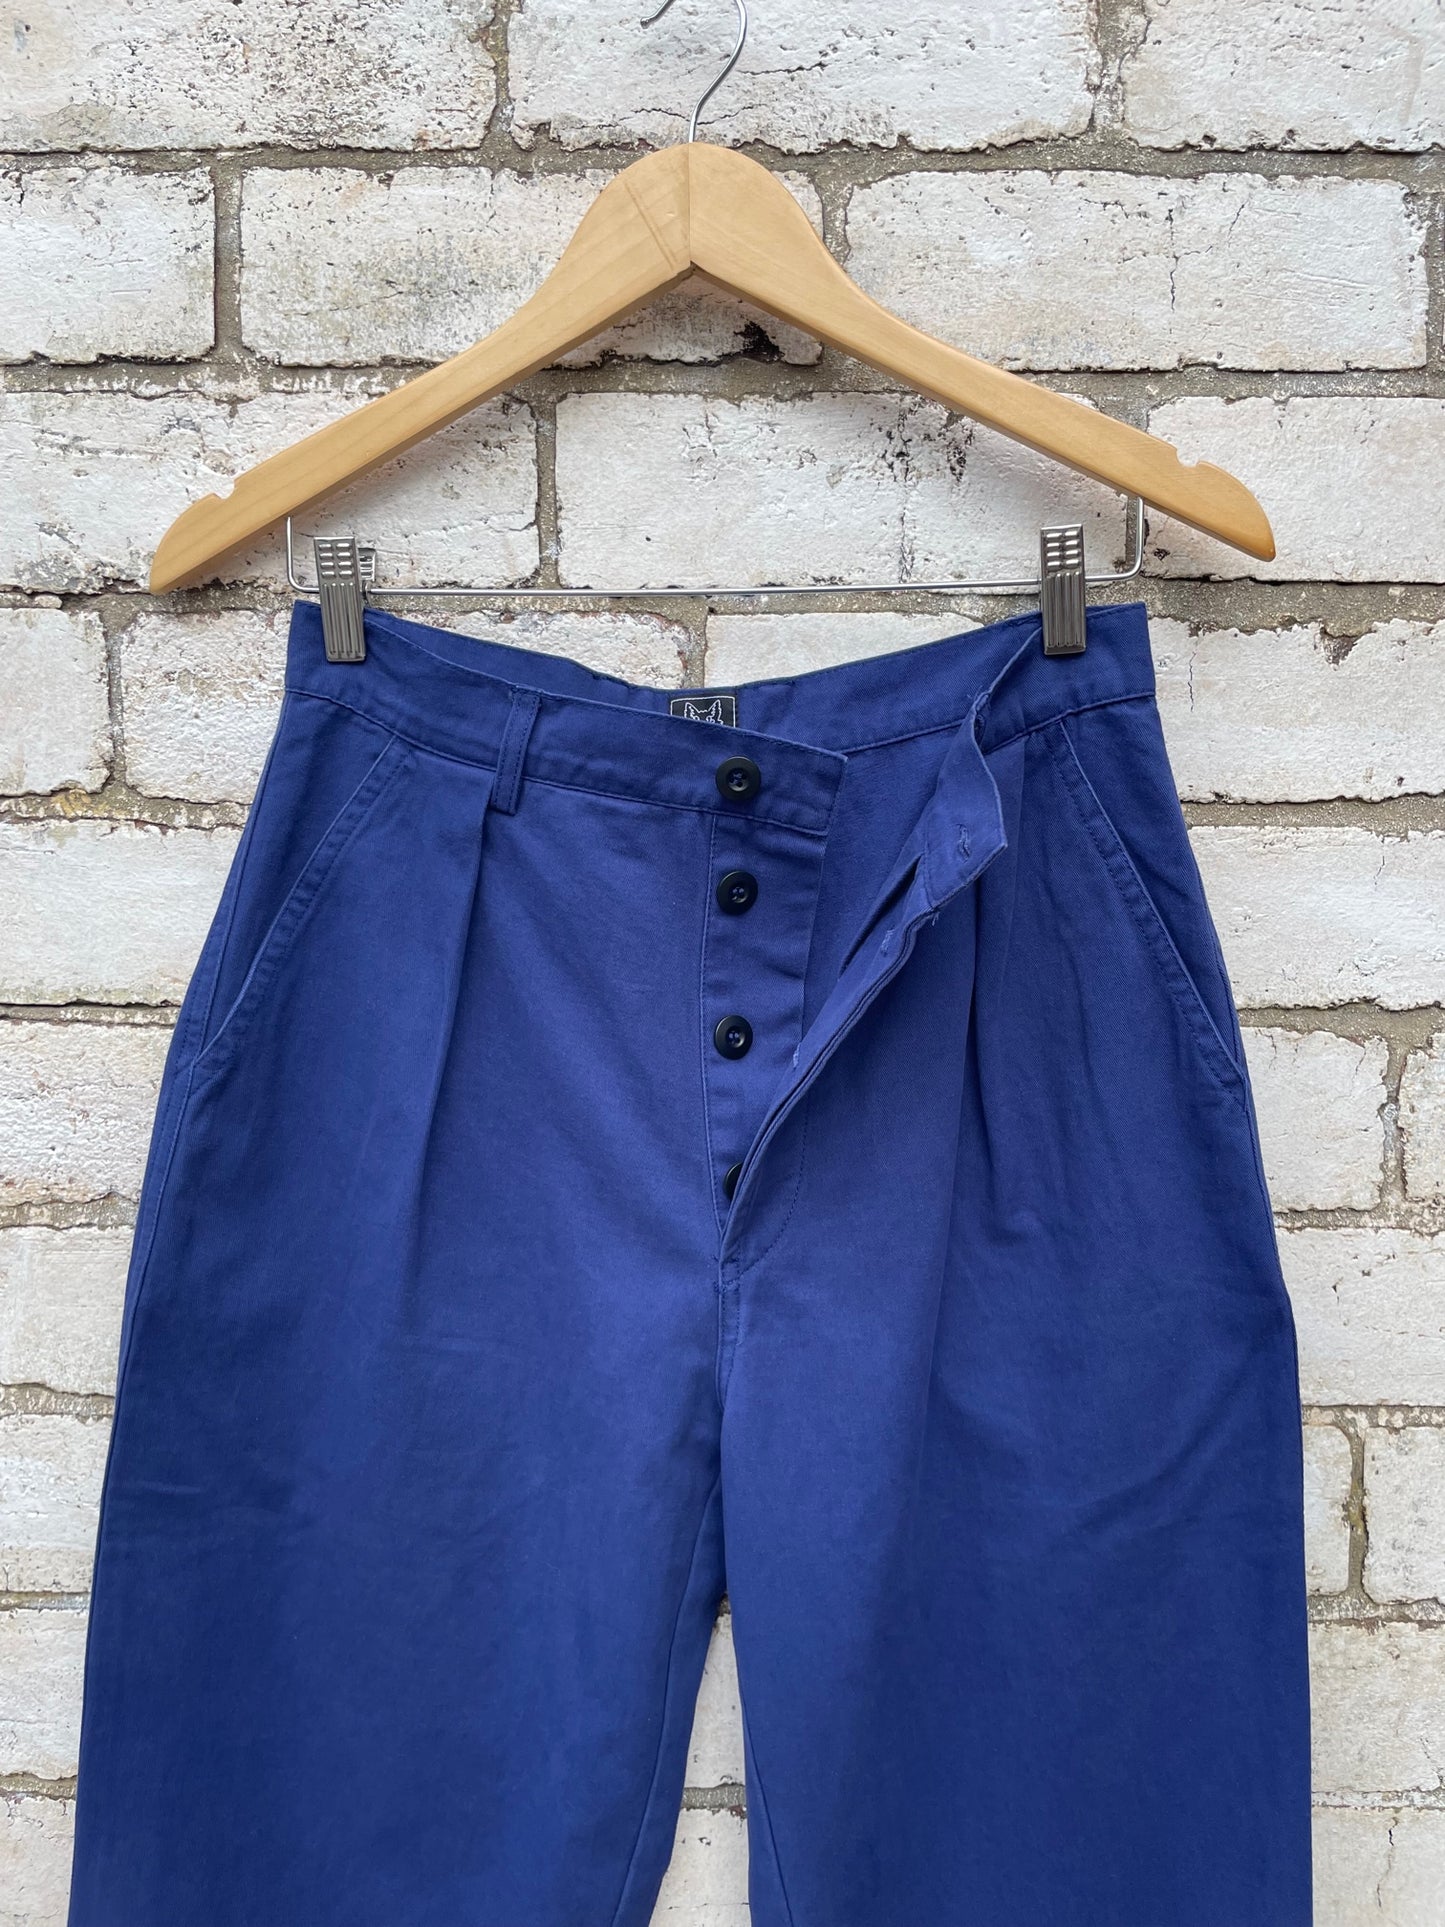 French Work Pants Navy Blue